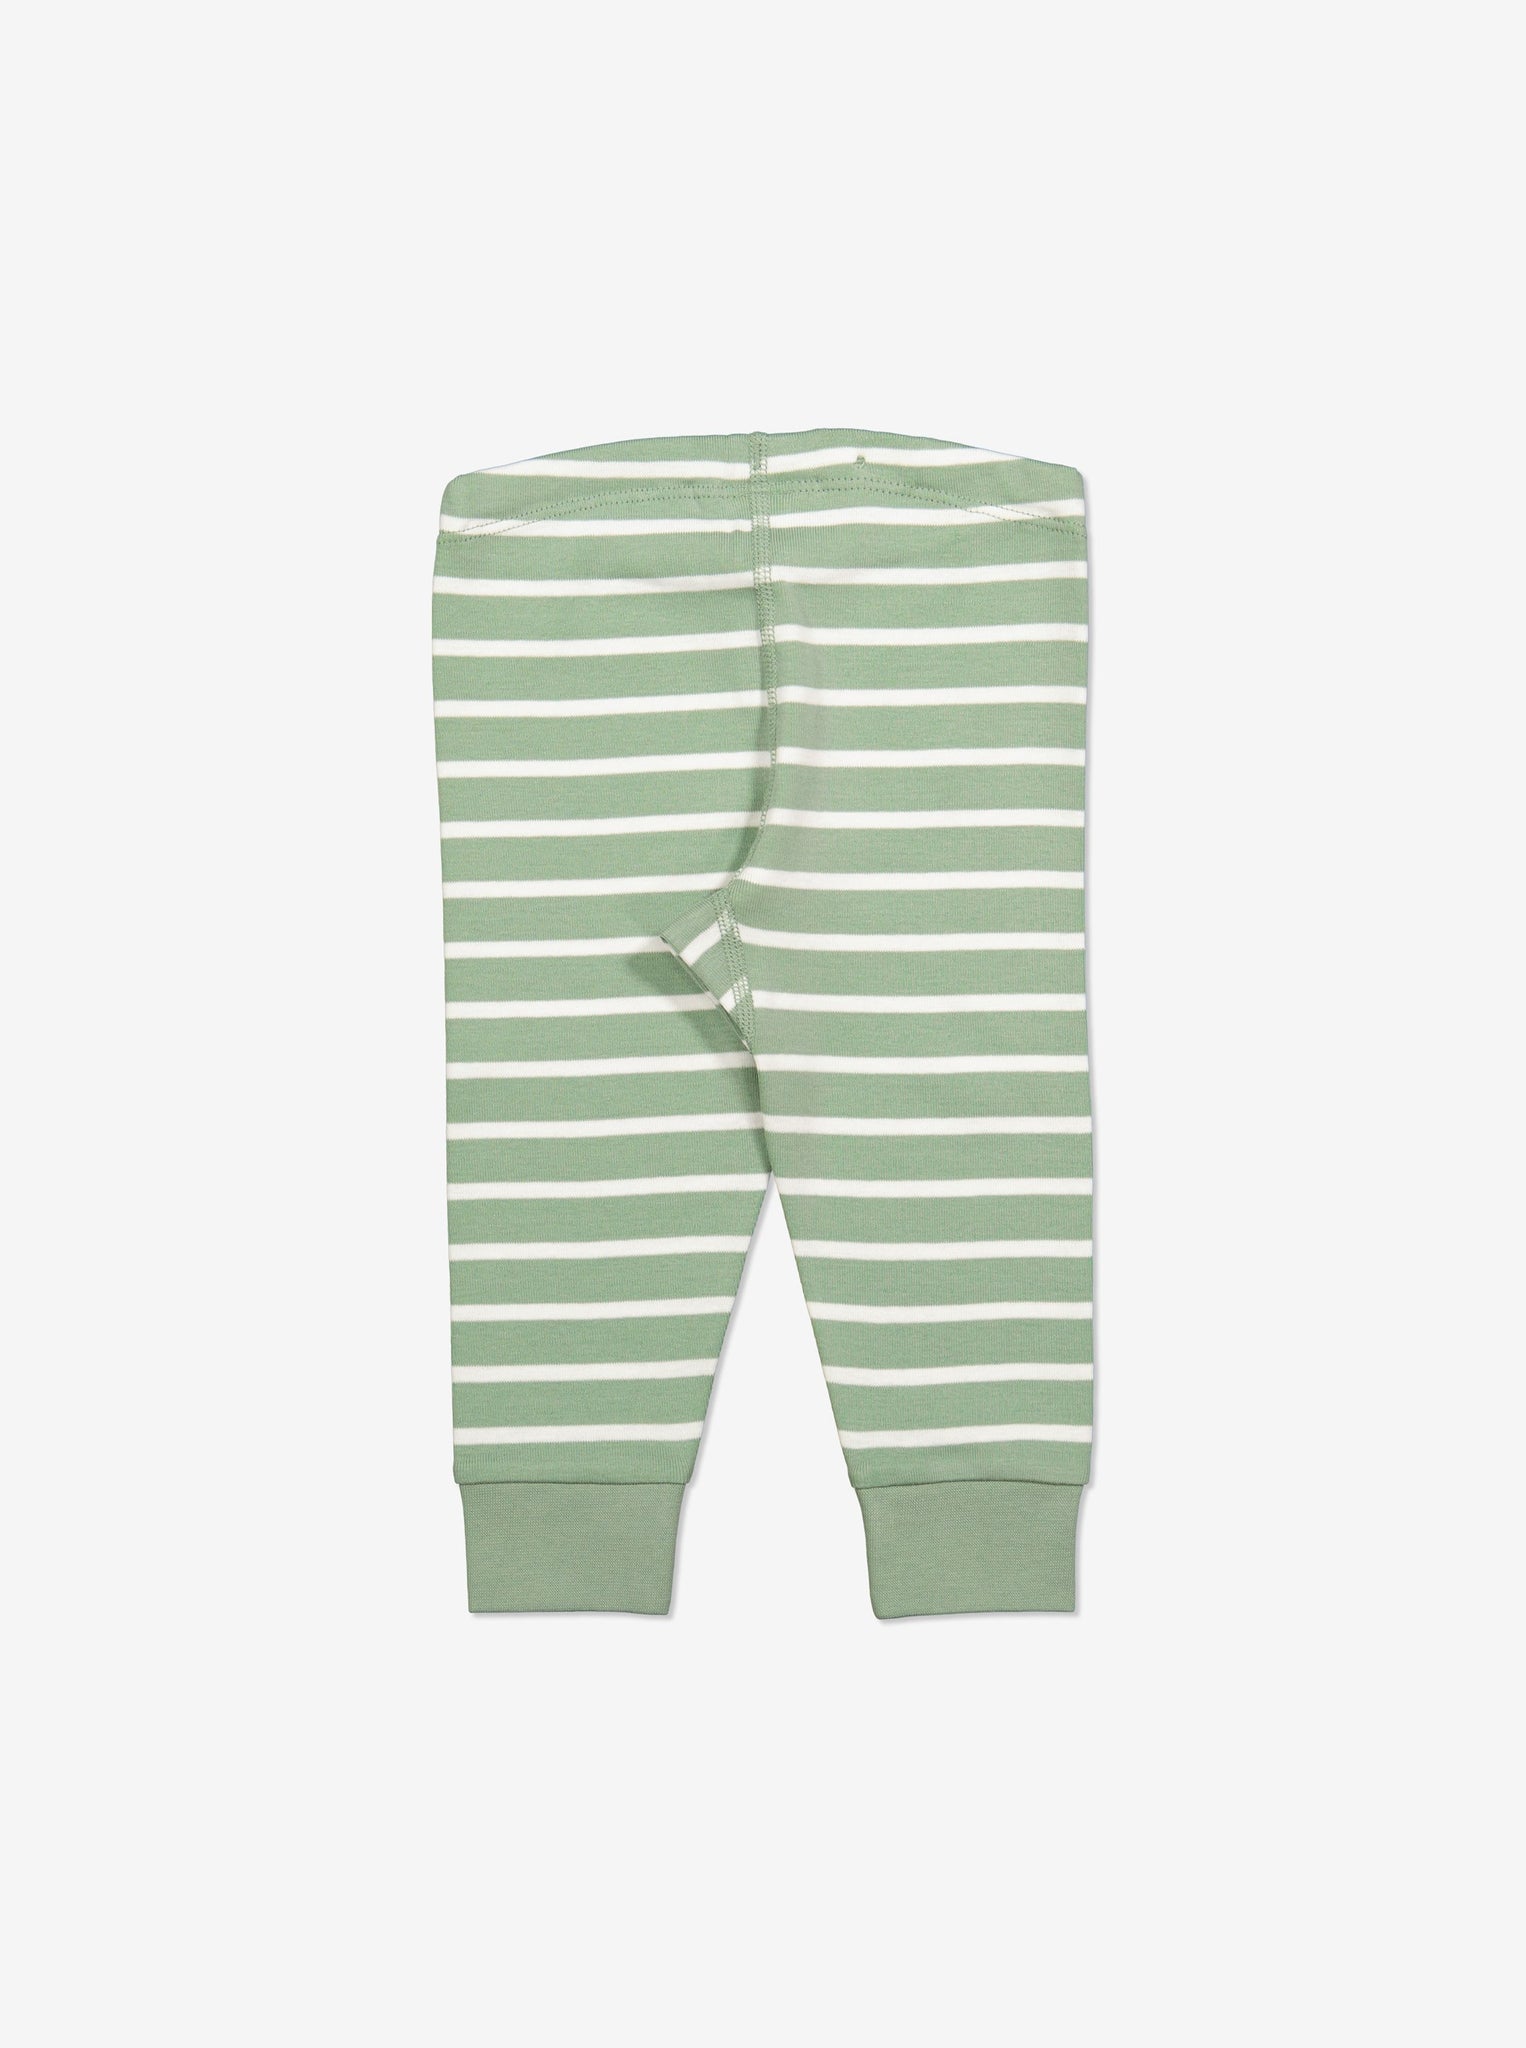  Organic Striped Green Baby Leggings from Polarn O. Pyret Kidswear. Made with 100% organic cotton.